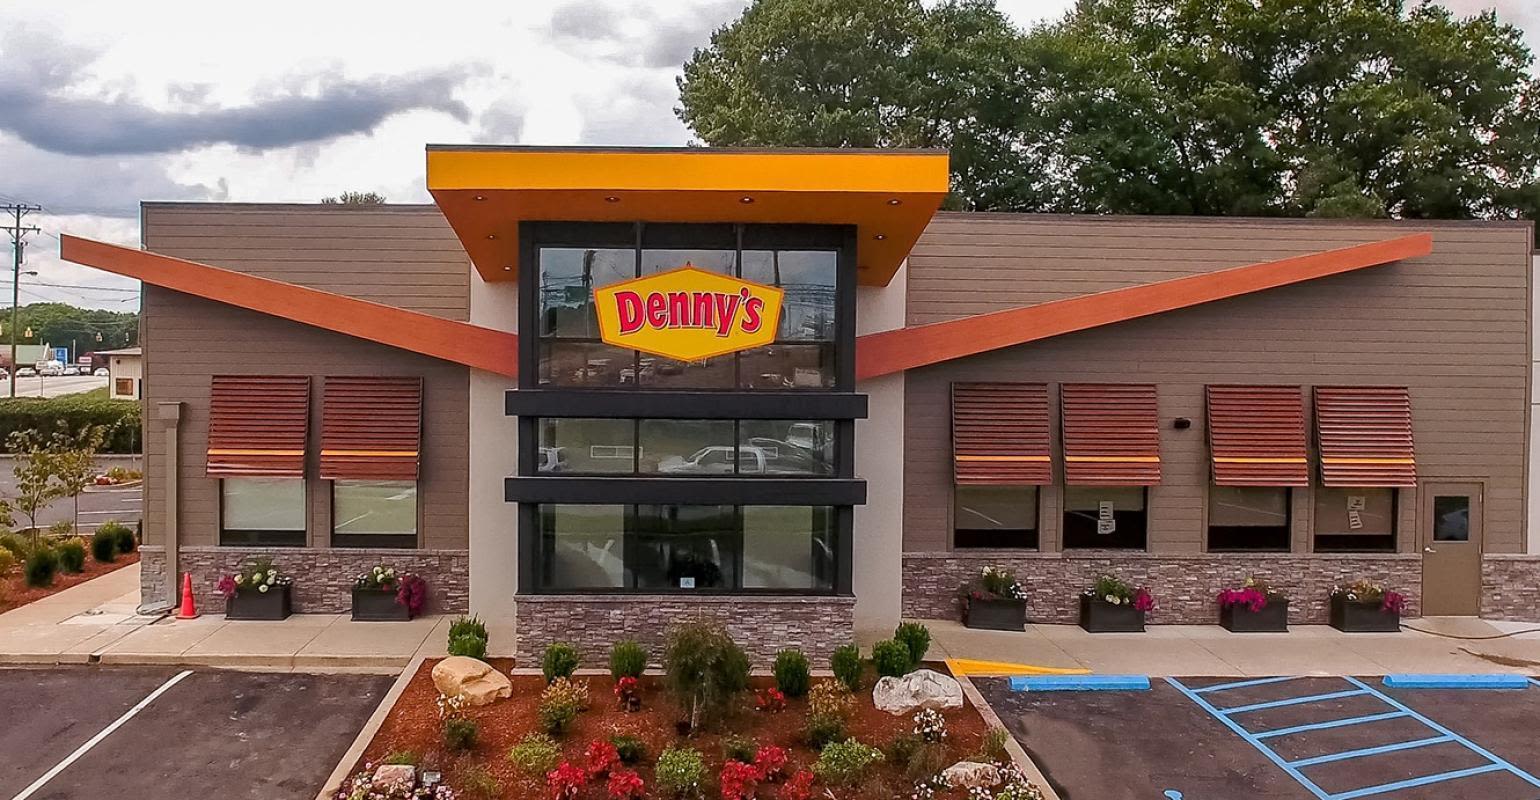 Denny’s will return $2-$4-$6-$8 value menu with $10 option